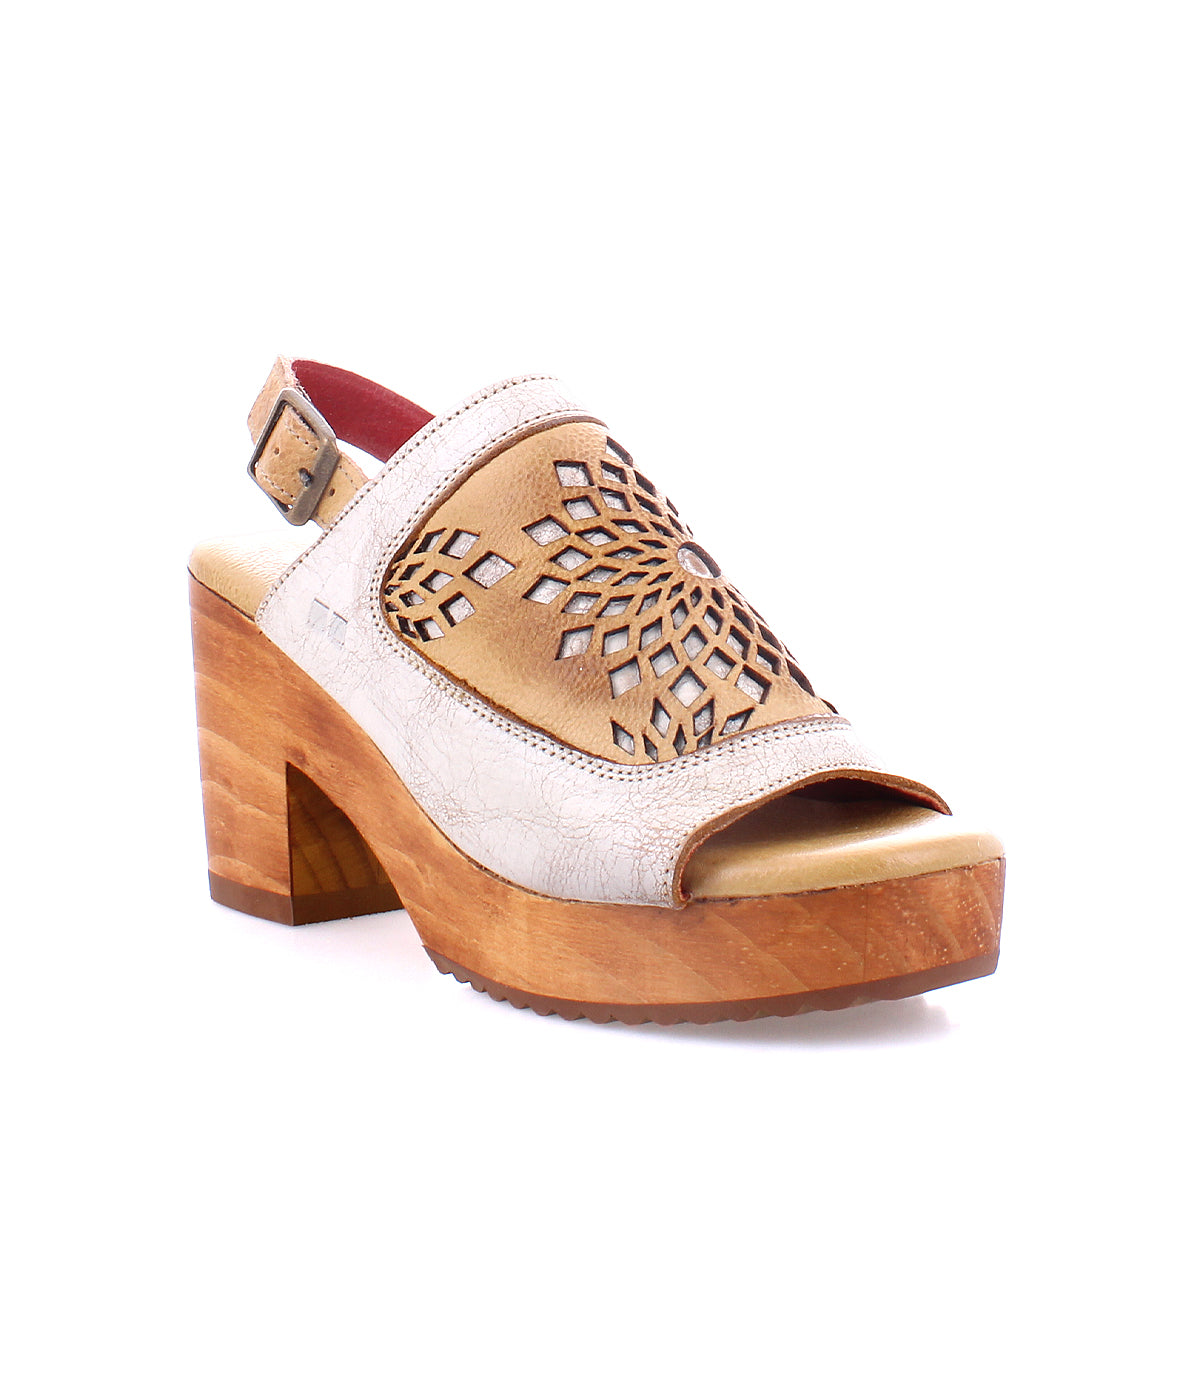 An open-toe women's sandal with a wooden platform and an adjustable ankle buckle called Jinkie by Bed Stu.